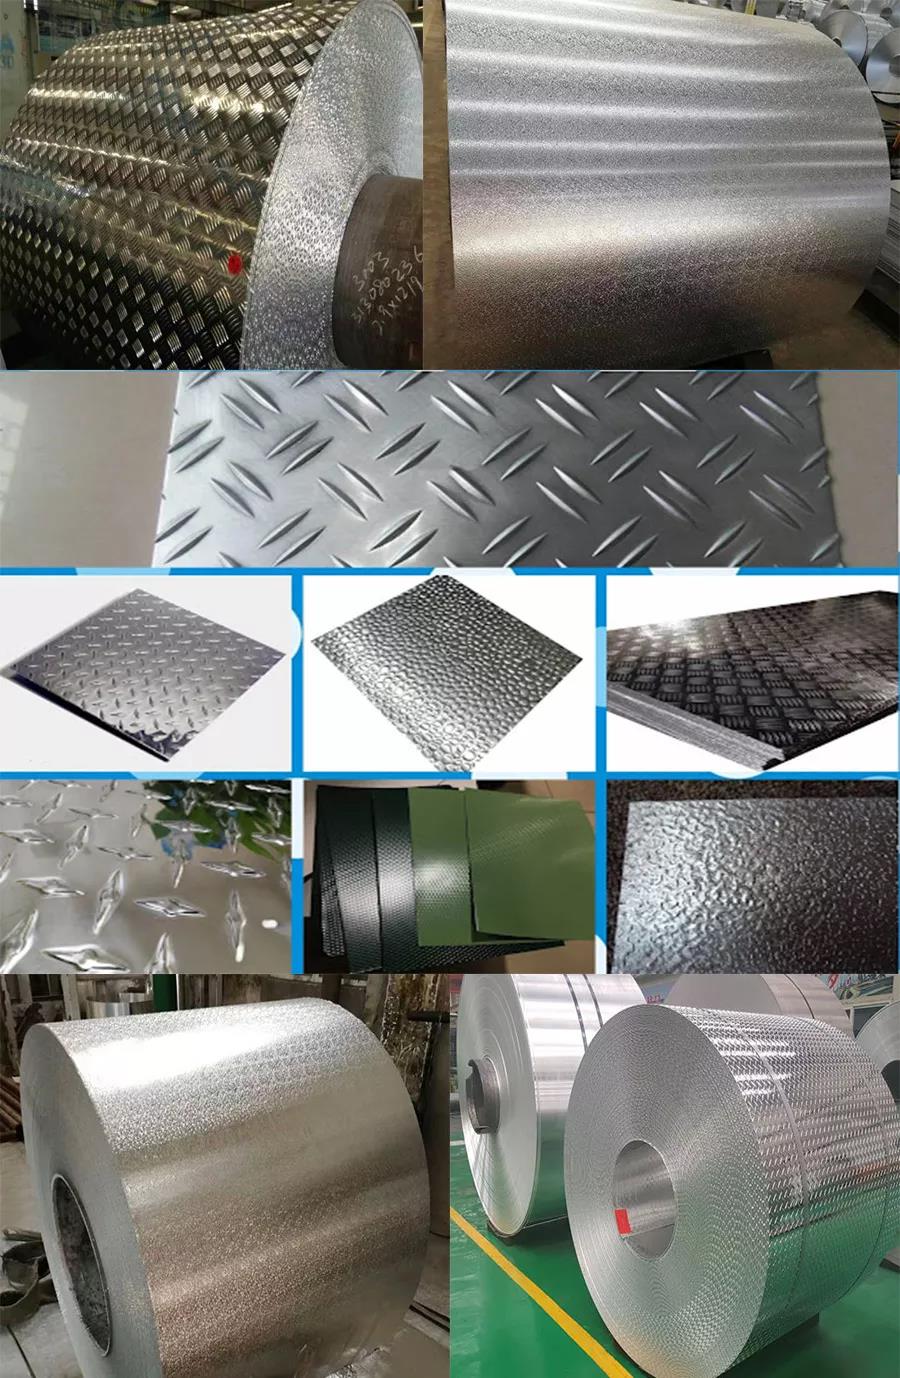 Patterned Aluminum Roll Supplier in China